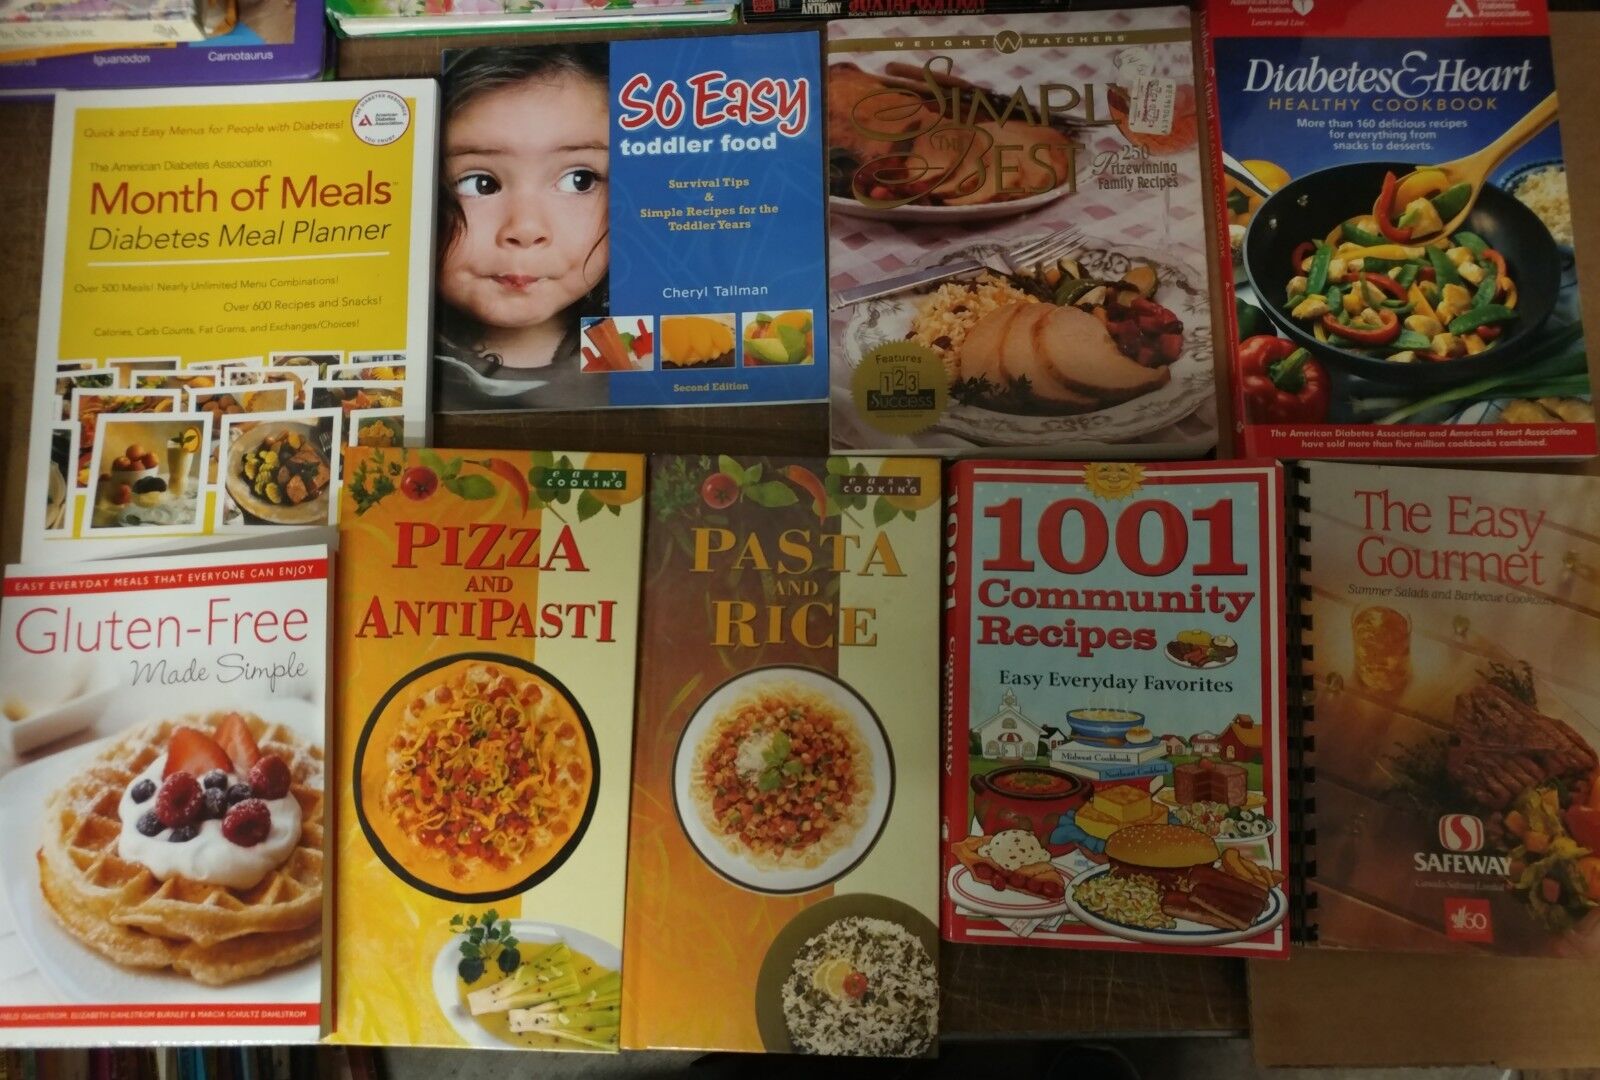 Lot of 20 Cooking Baking Recipe Grilling Low-Fat Ingredient Books MIX-UNSORTED Без бренда - фотография #2